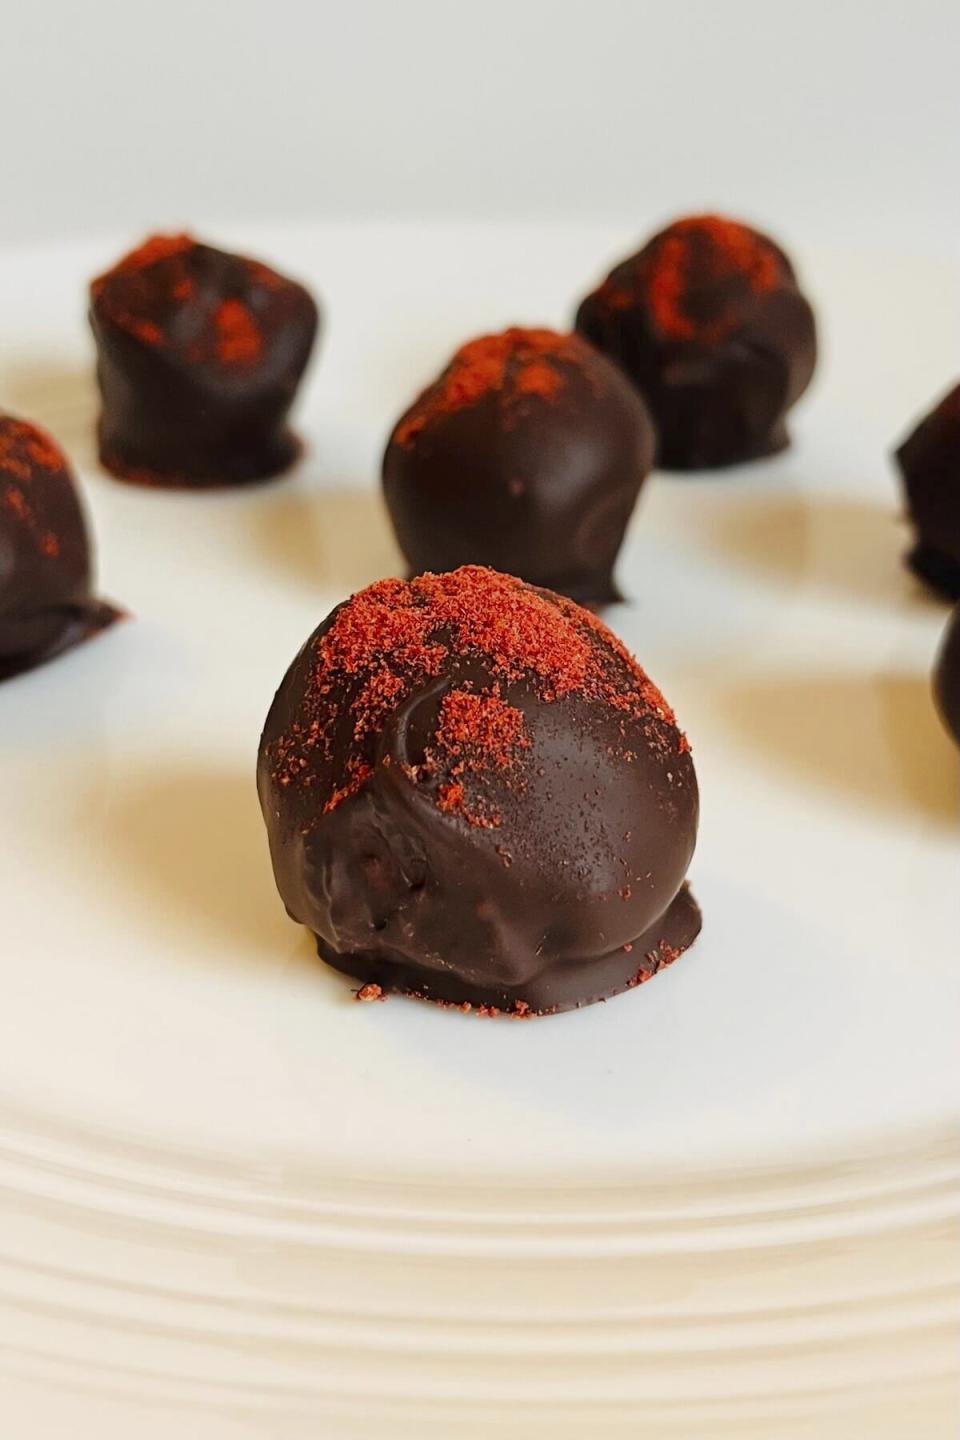 This image shows a plate of chocolate truffles. Rather than spending on store-bought chocolates for Valentine’s Day, make them together as a fun way to spend the evening with your Valentine. (Jennifer Bell via AP)